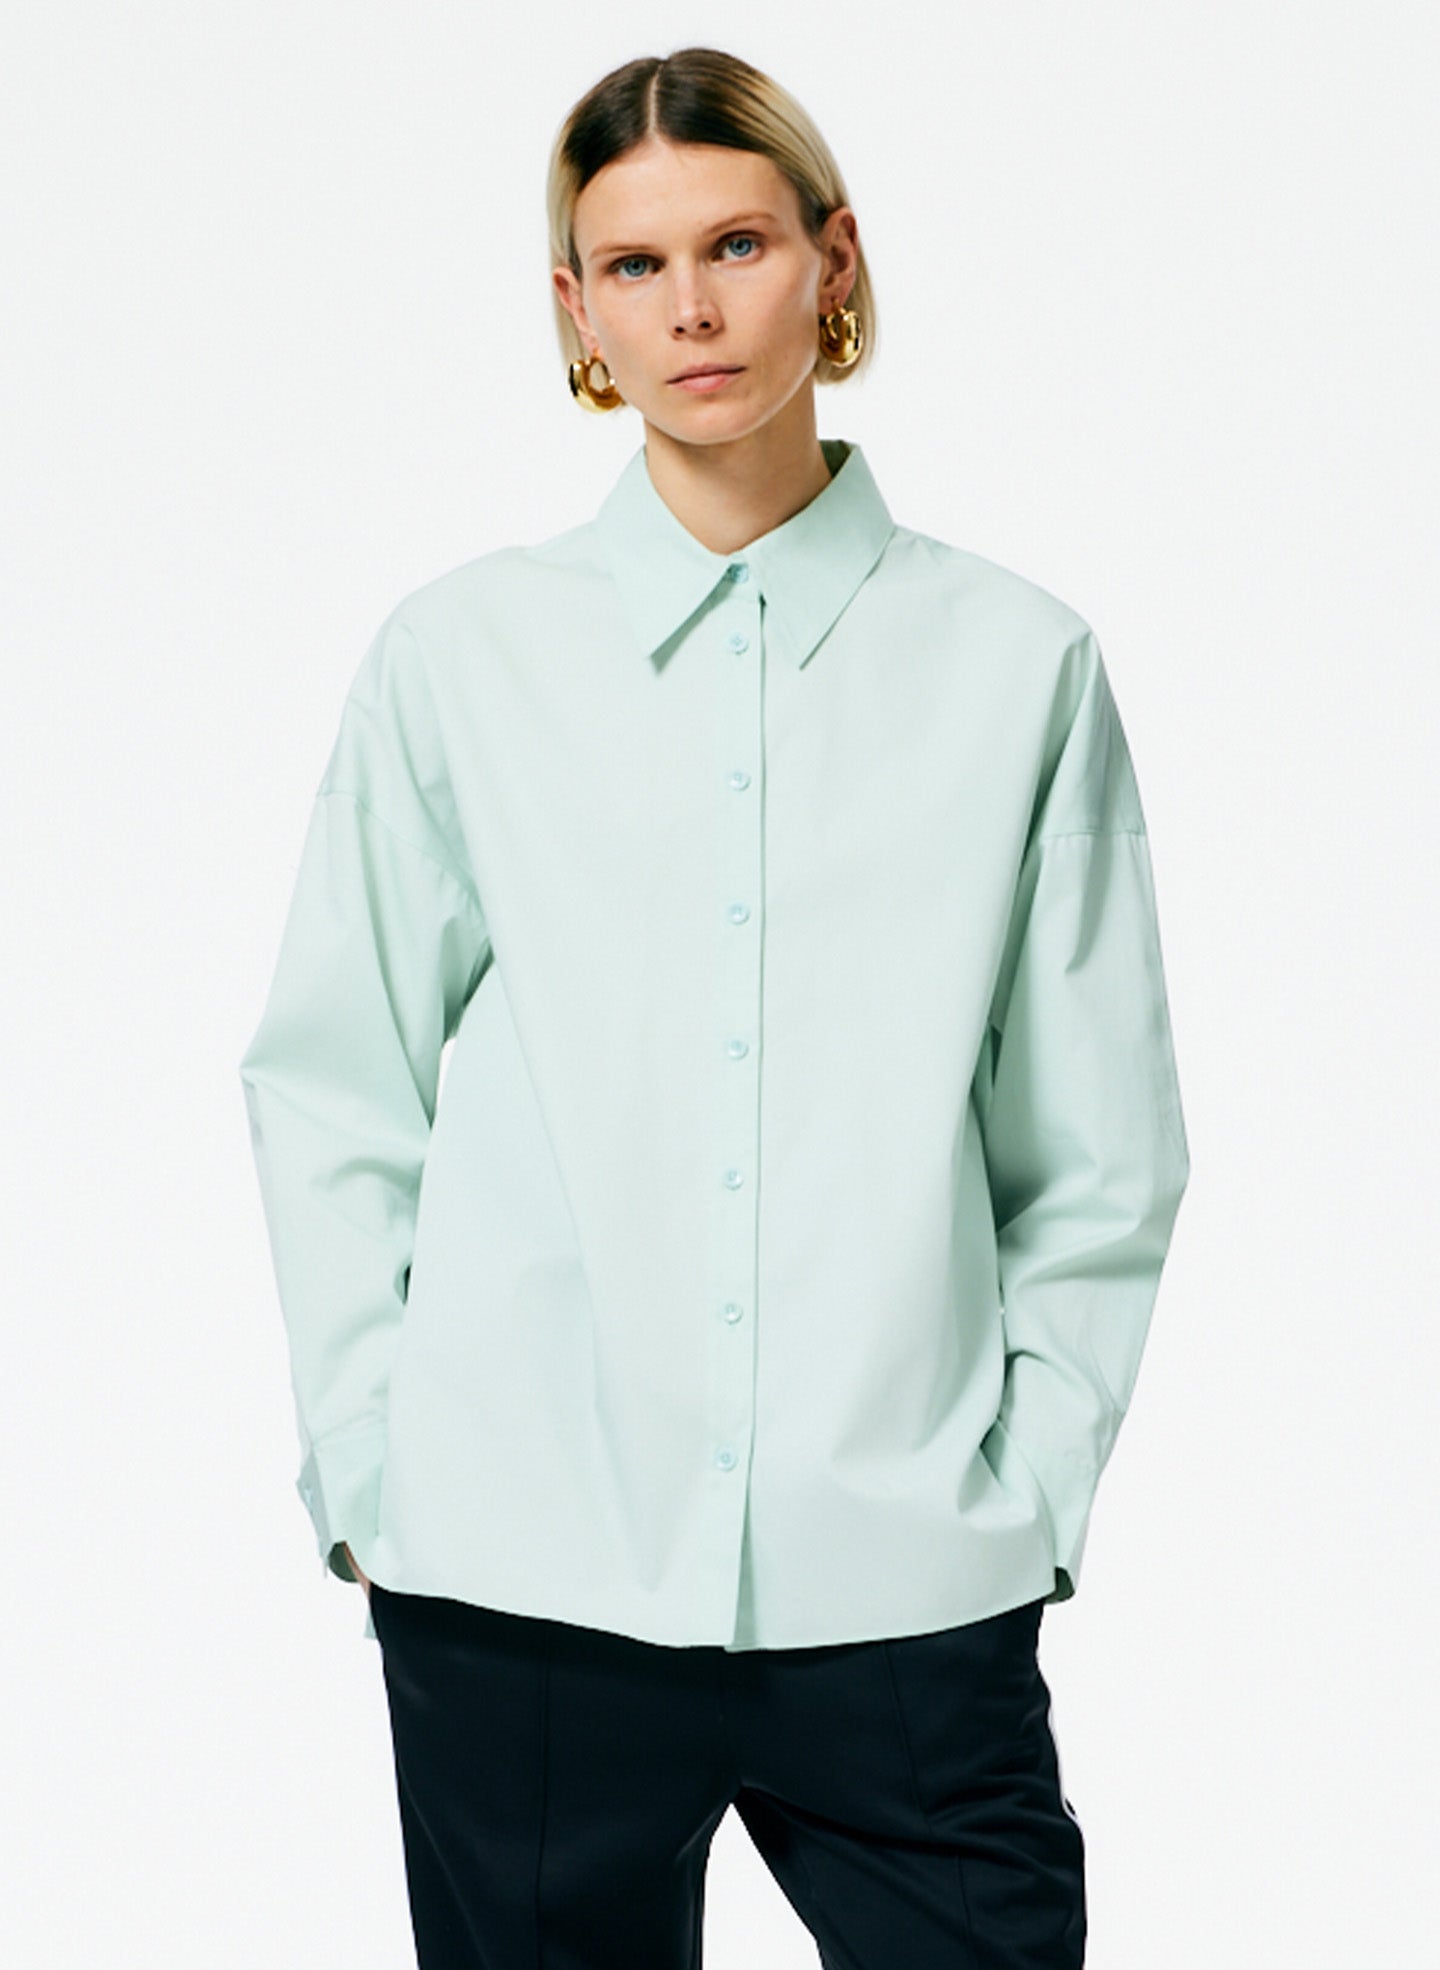 – Tibi Tops 2 Page Sale Official –